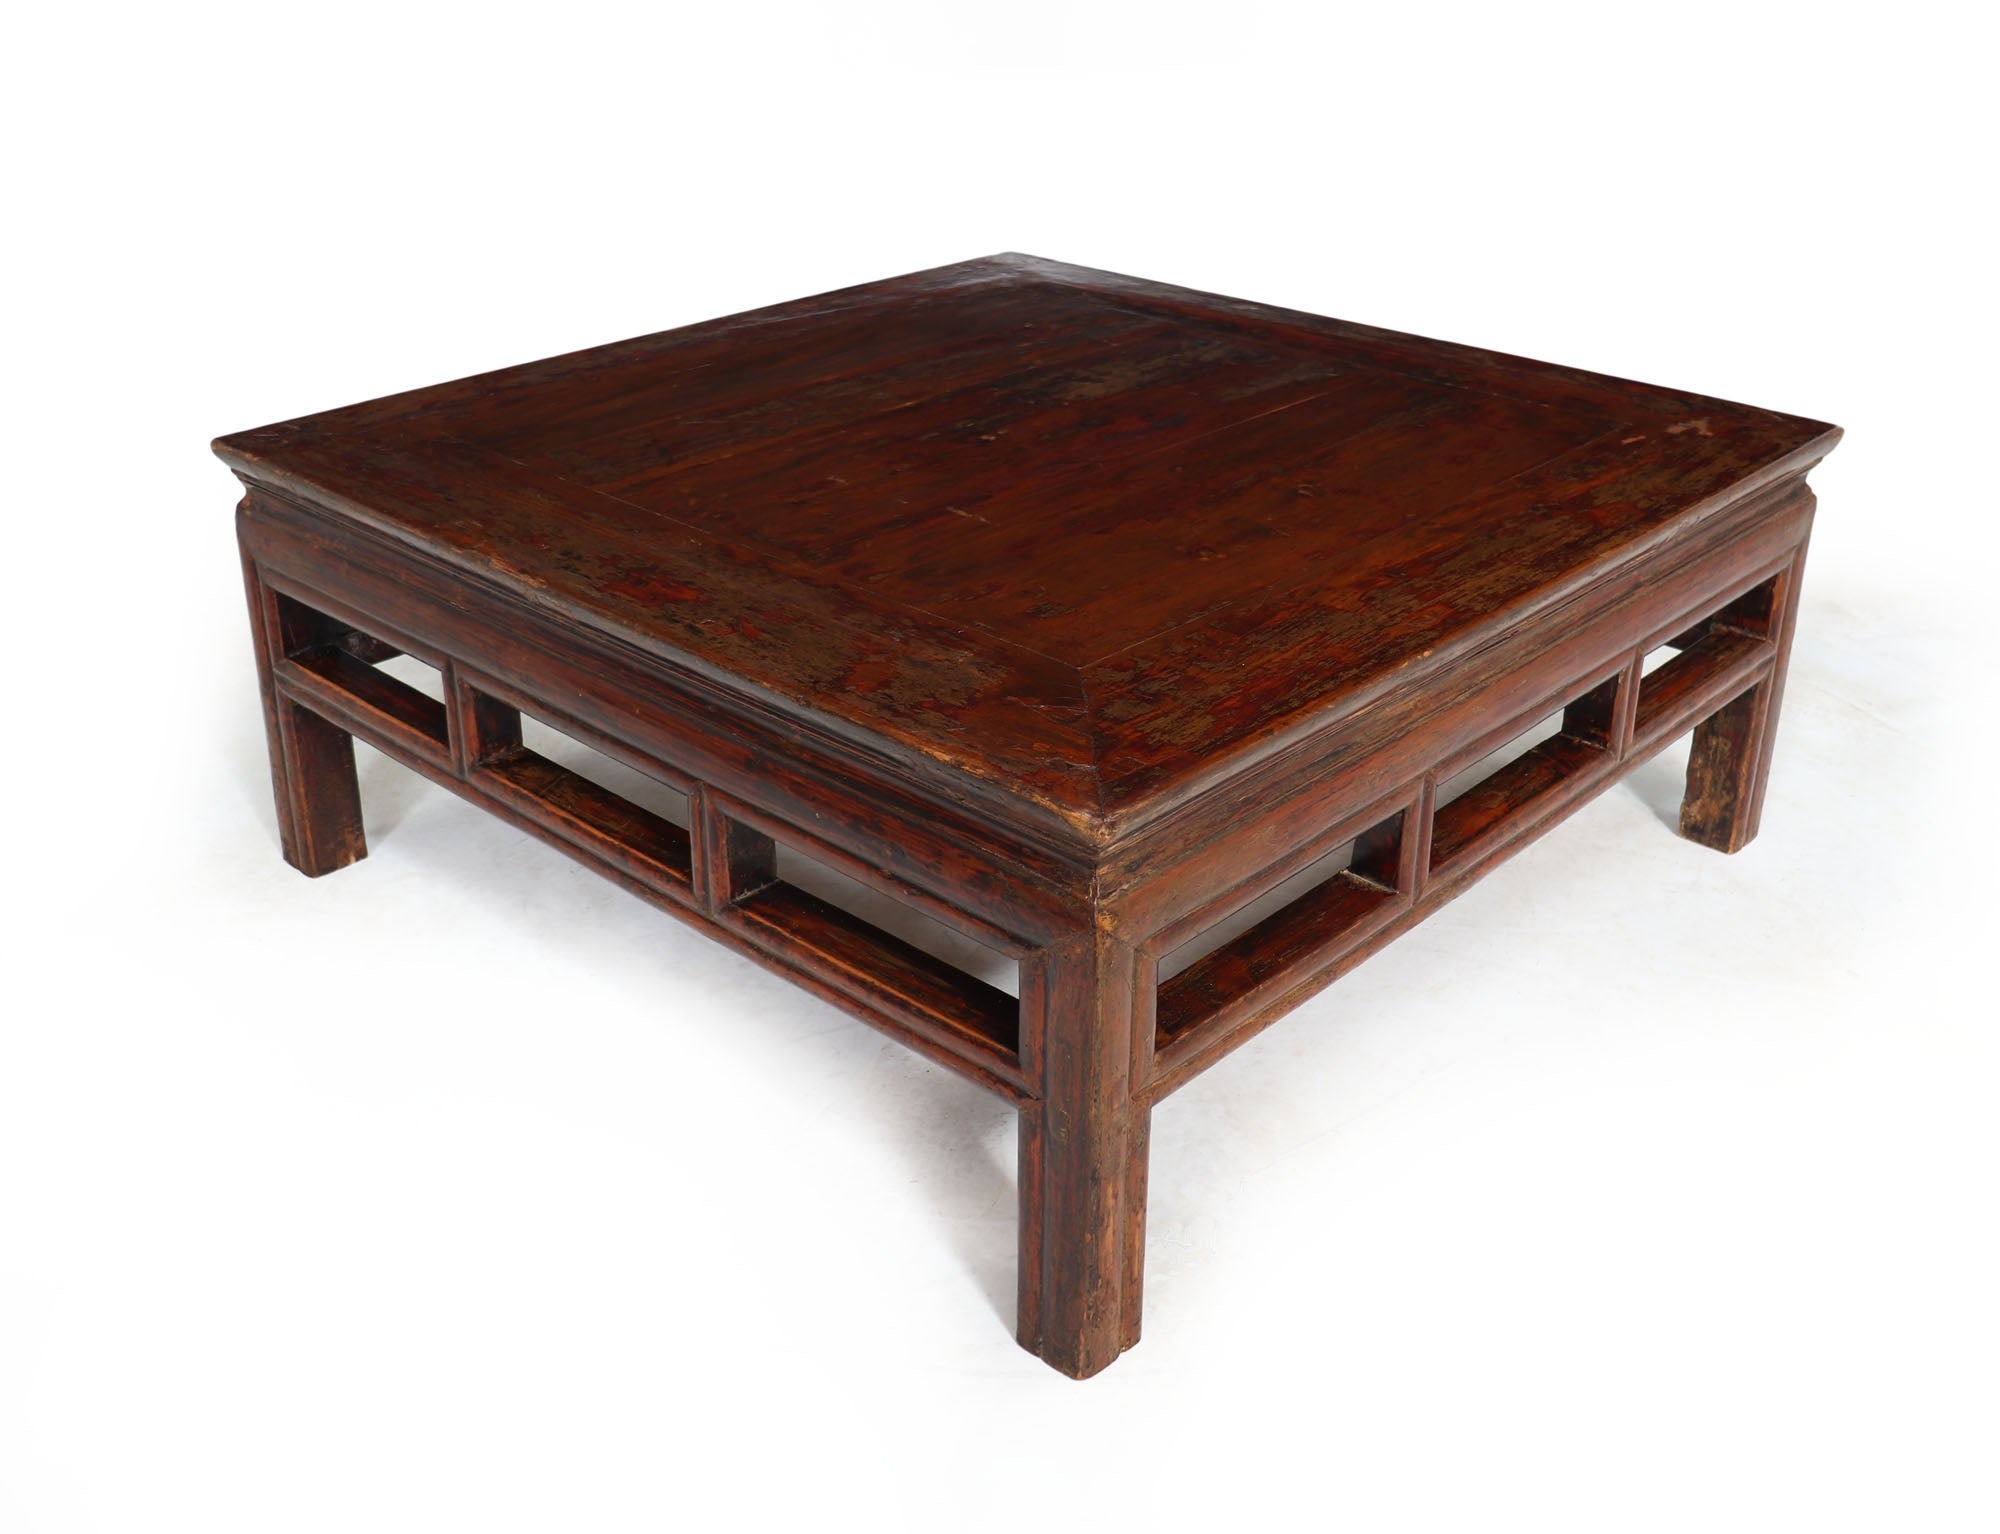 Chinese ���Kang��� Coffee Table Quing c1820 – The Fur